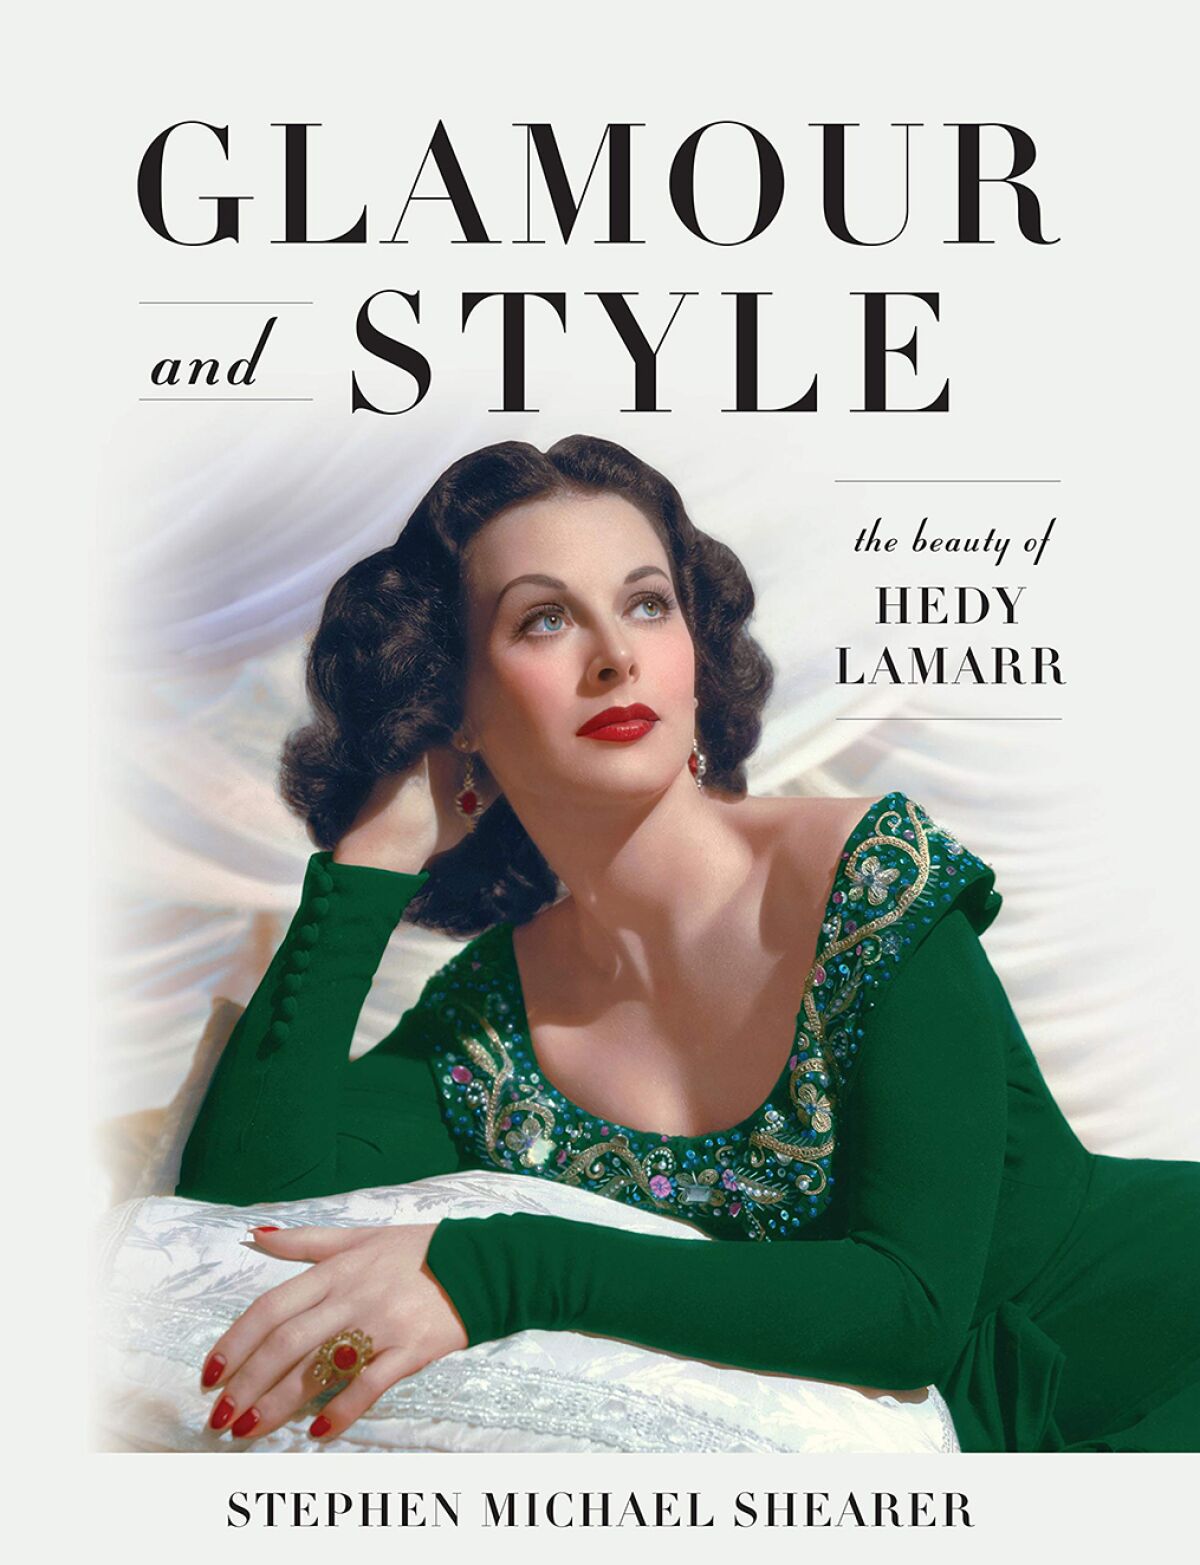 Glamore and Style book cover